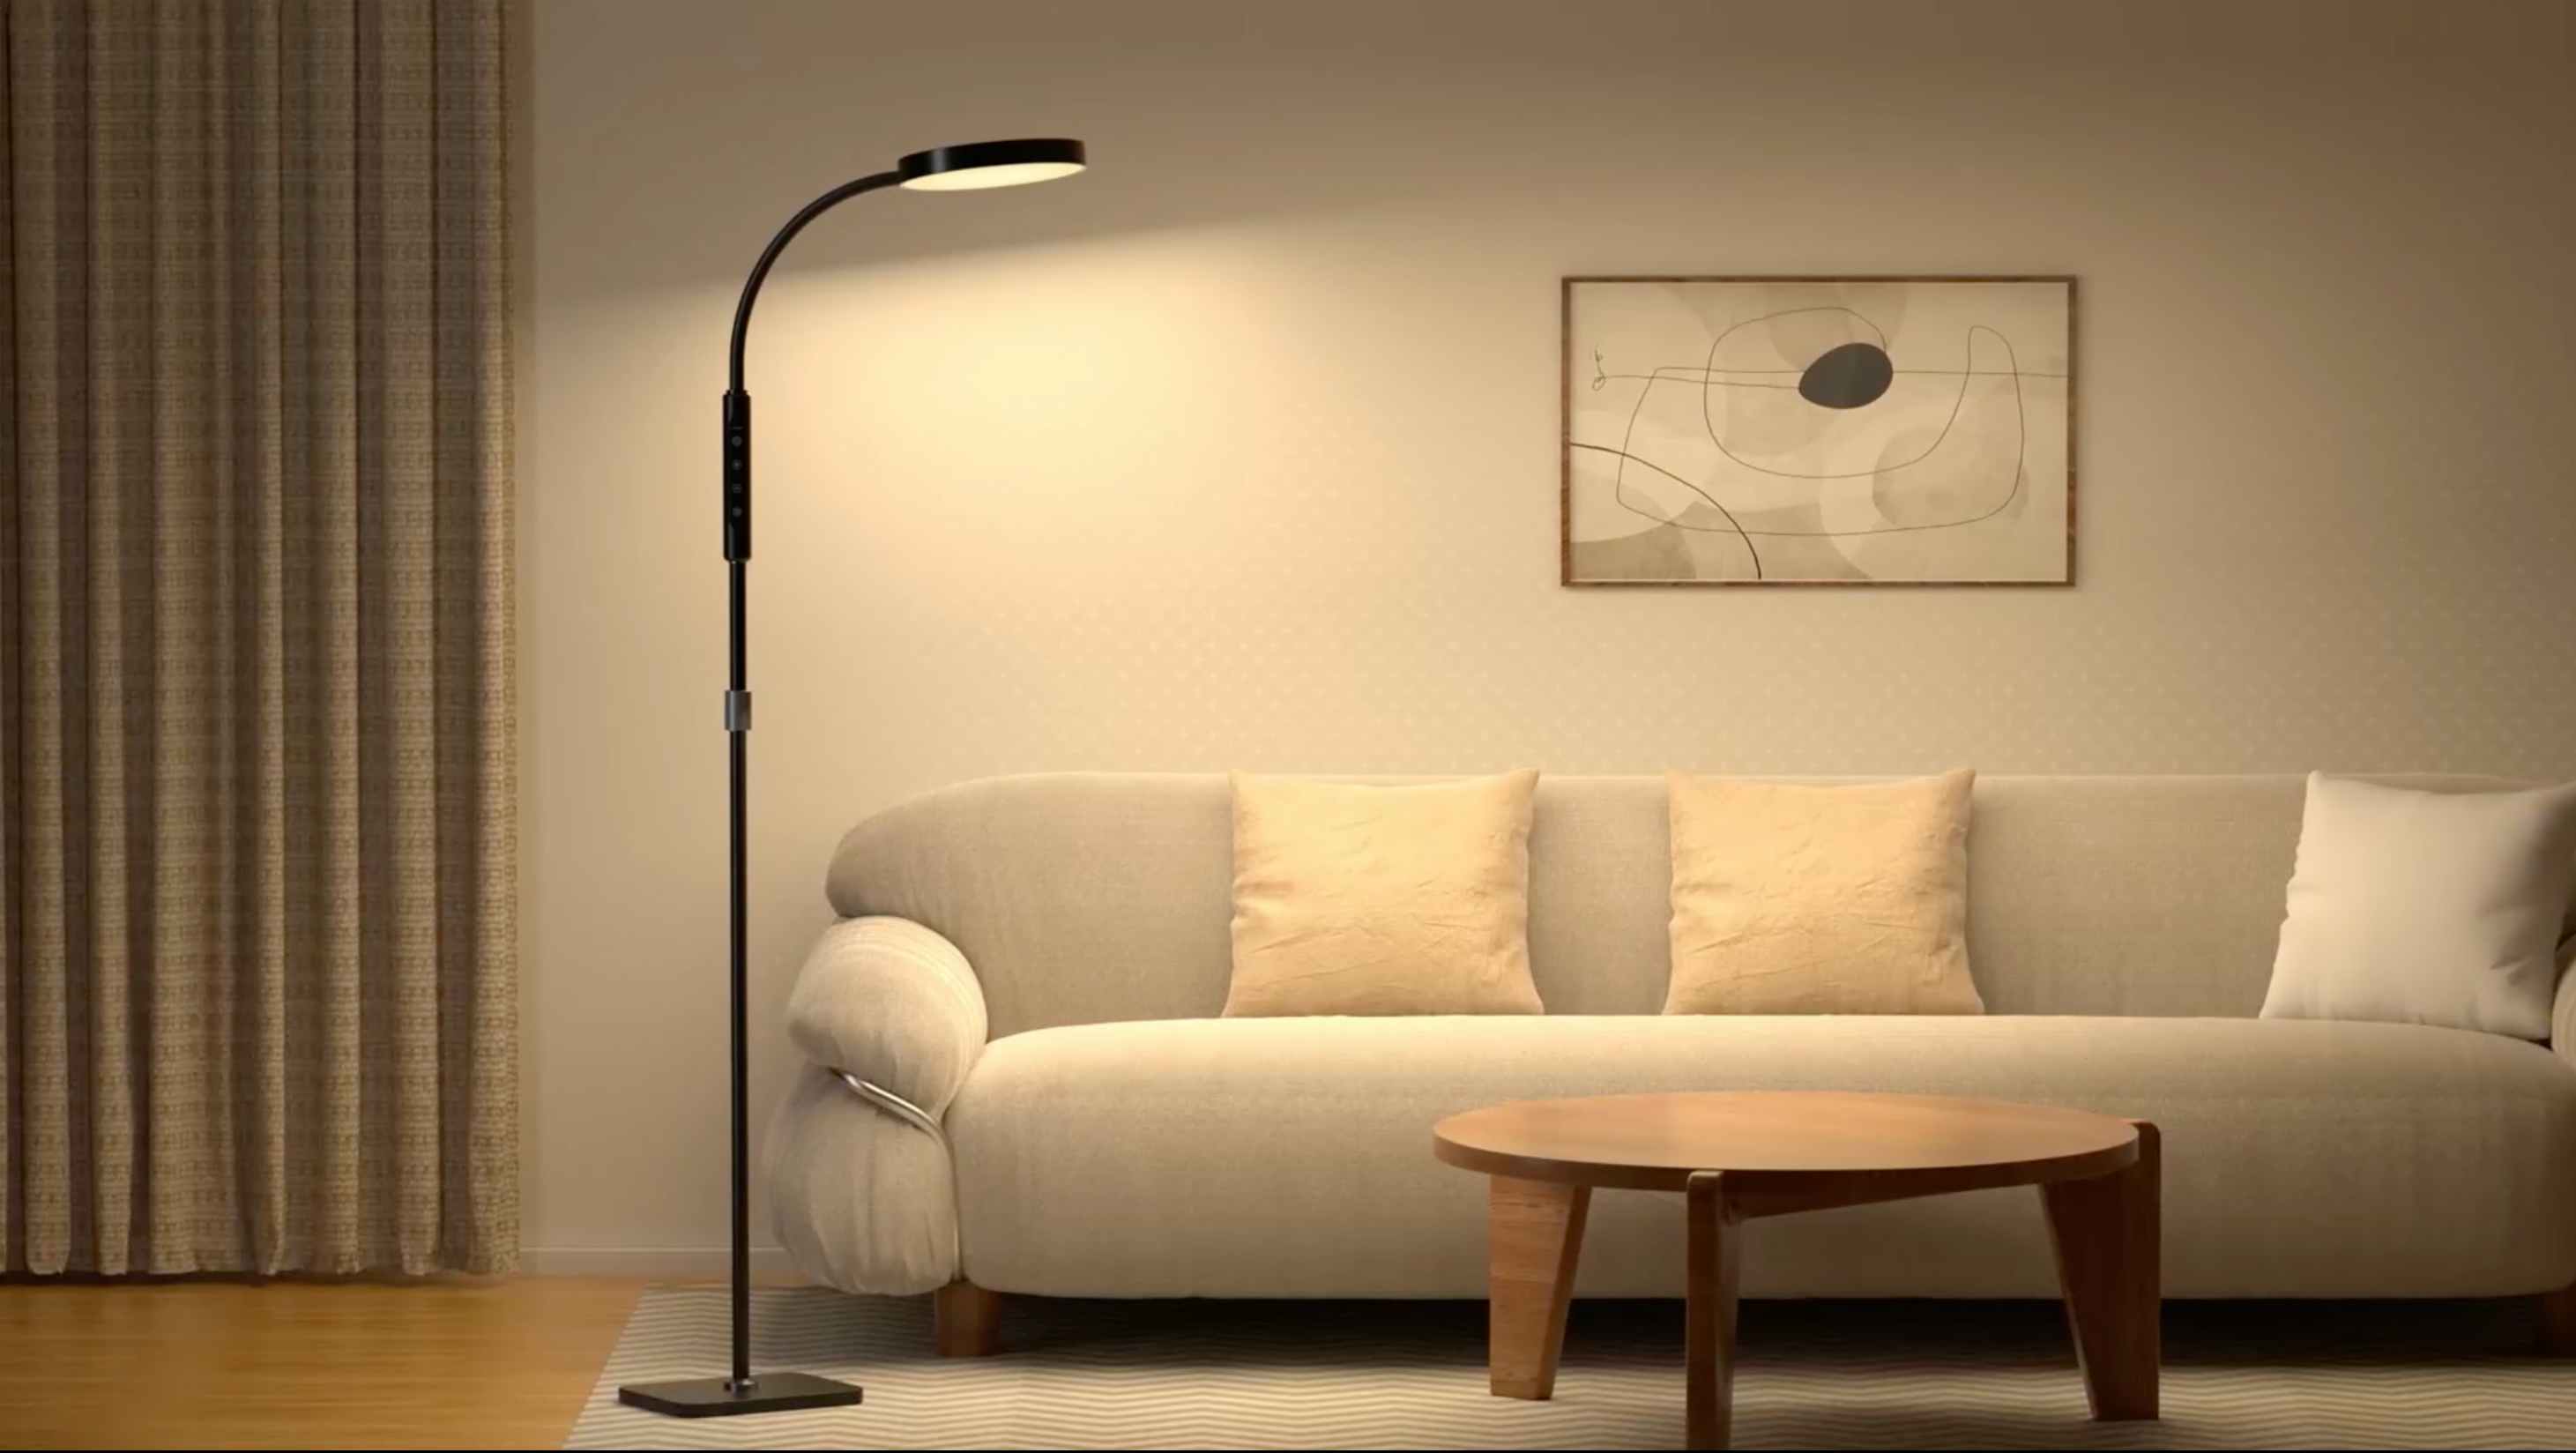 1,000 People Bought This Floor Lamp on Amazon in April — It's Now $32